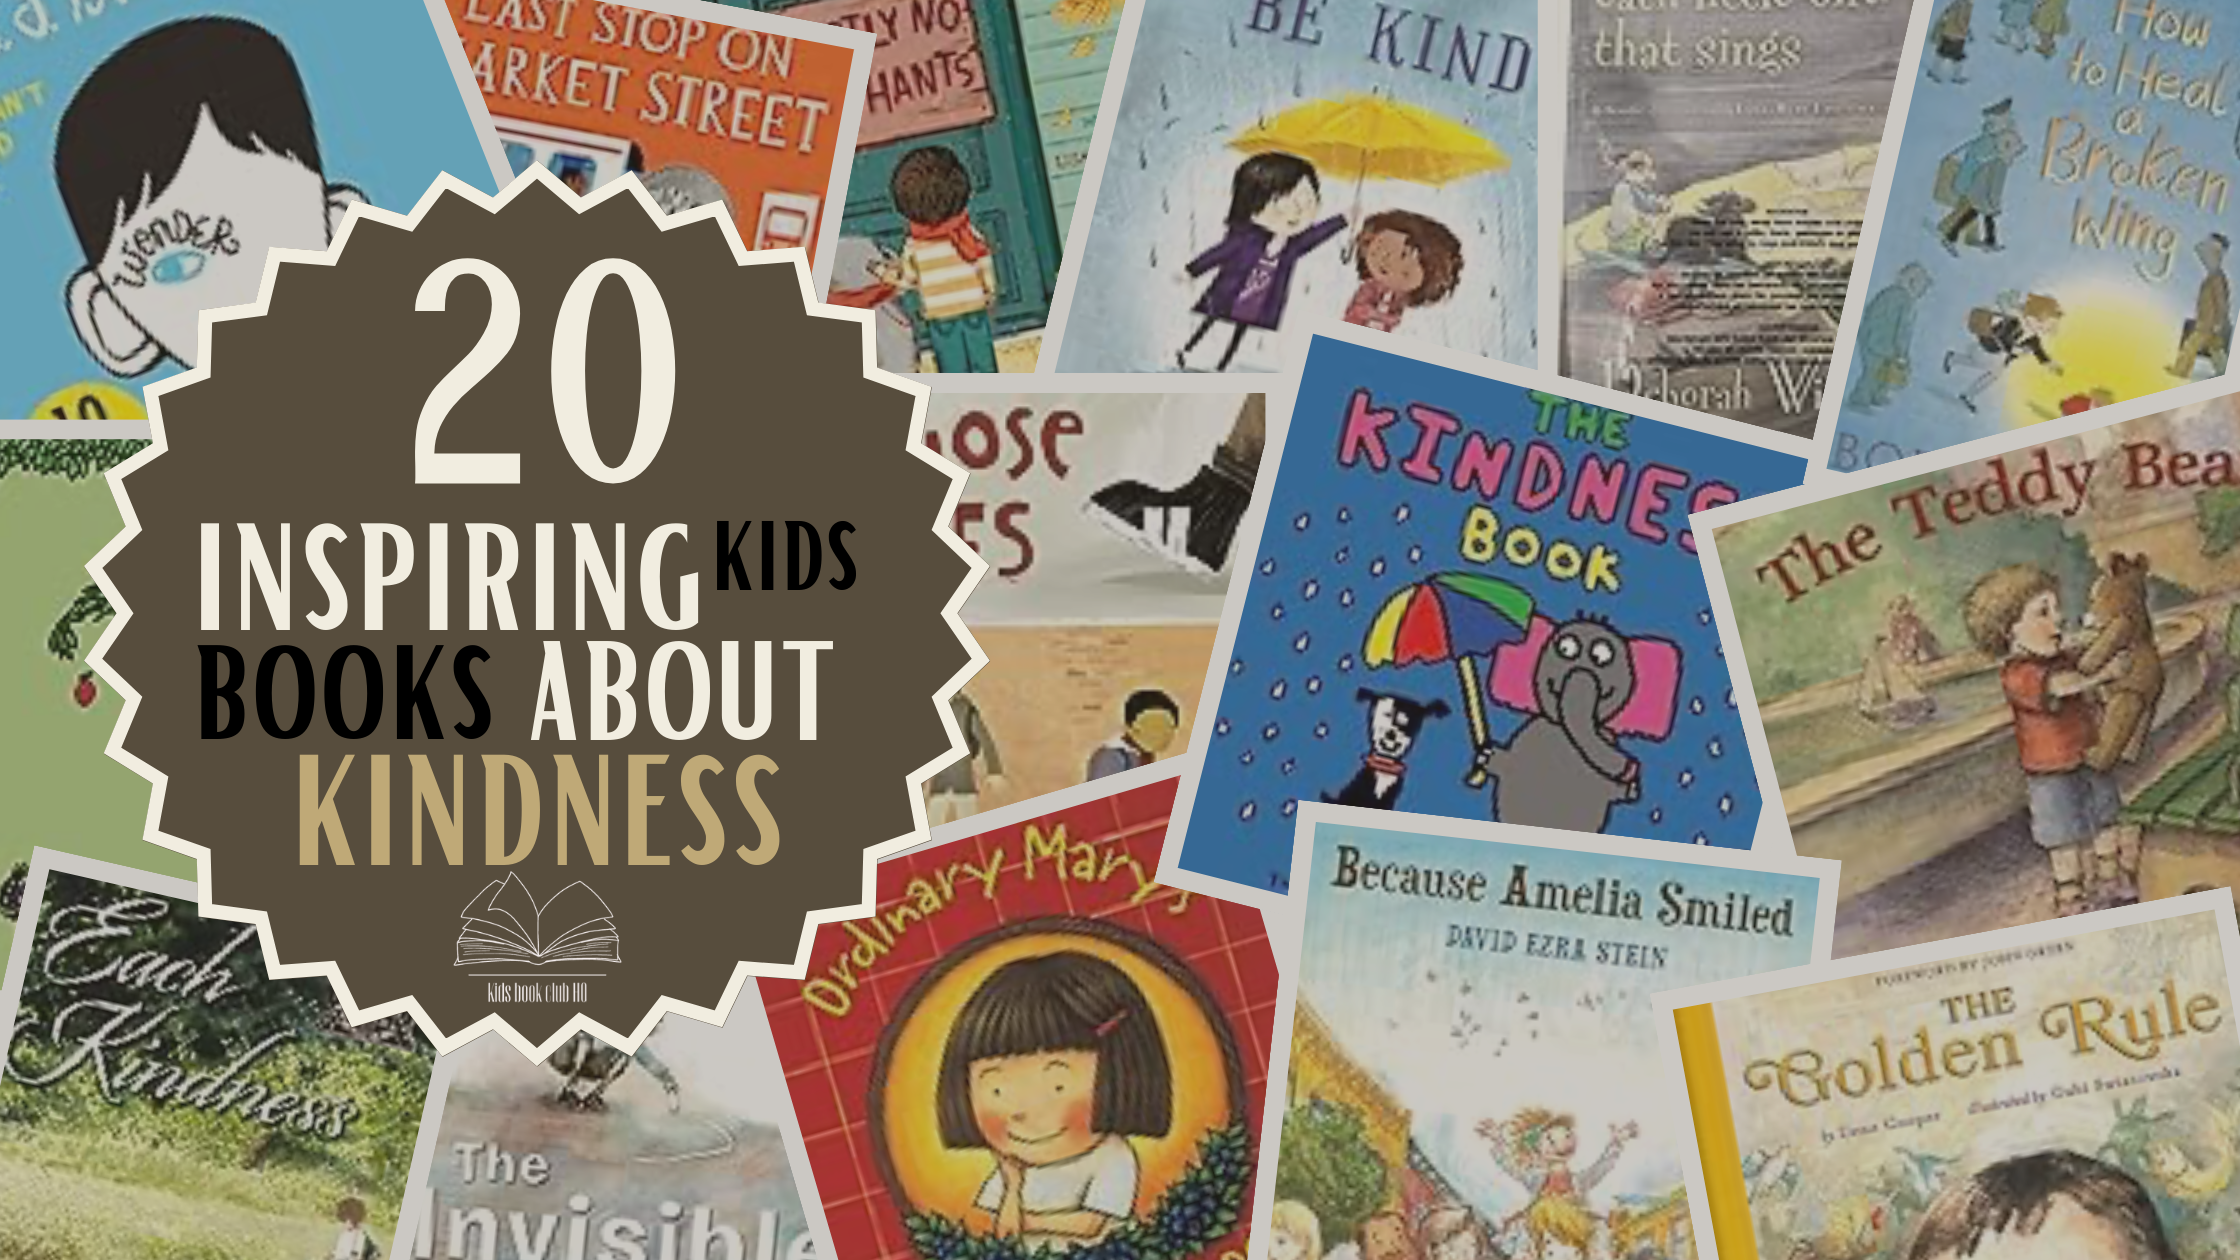 20 Inspiring Kids Books About Kindness: The ultimate guide